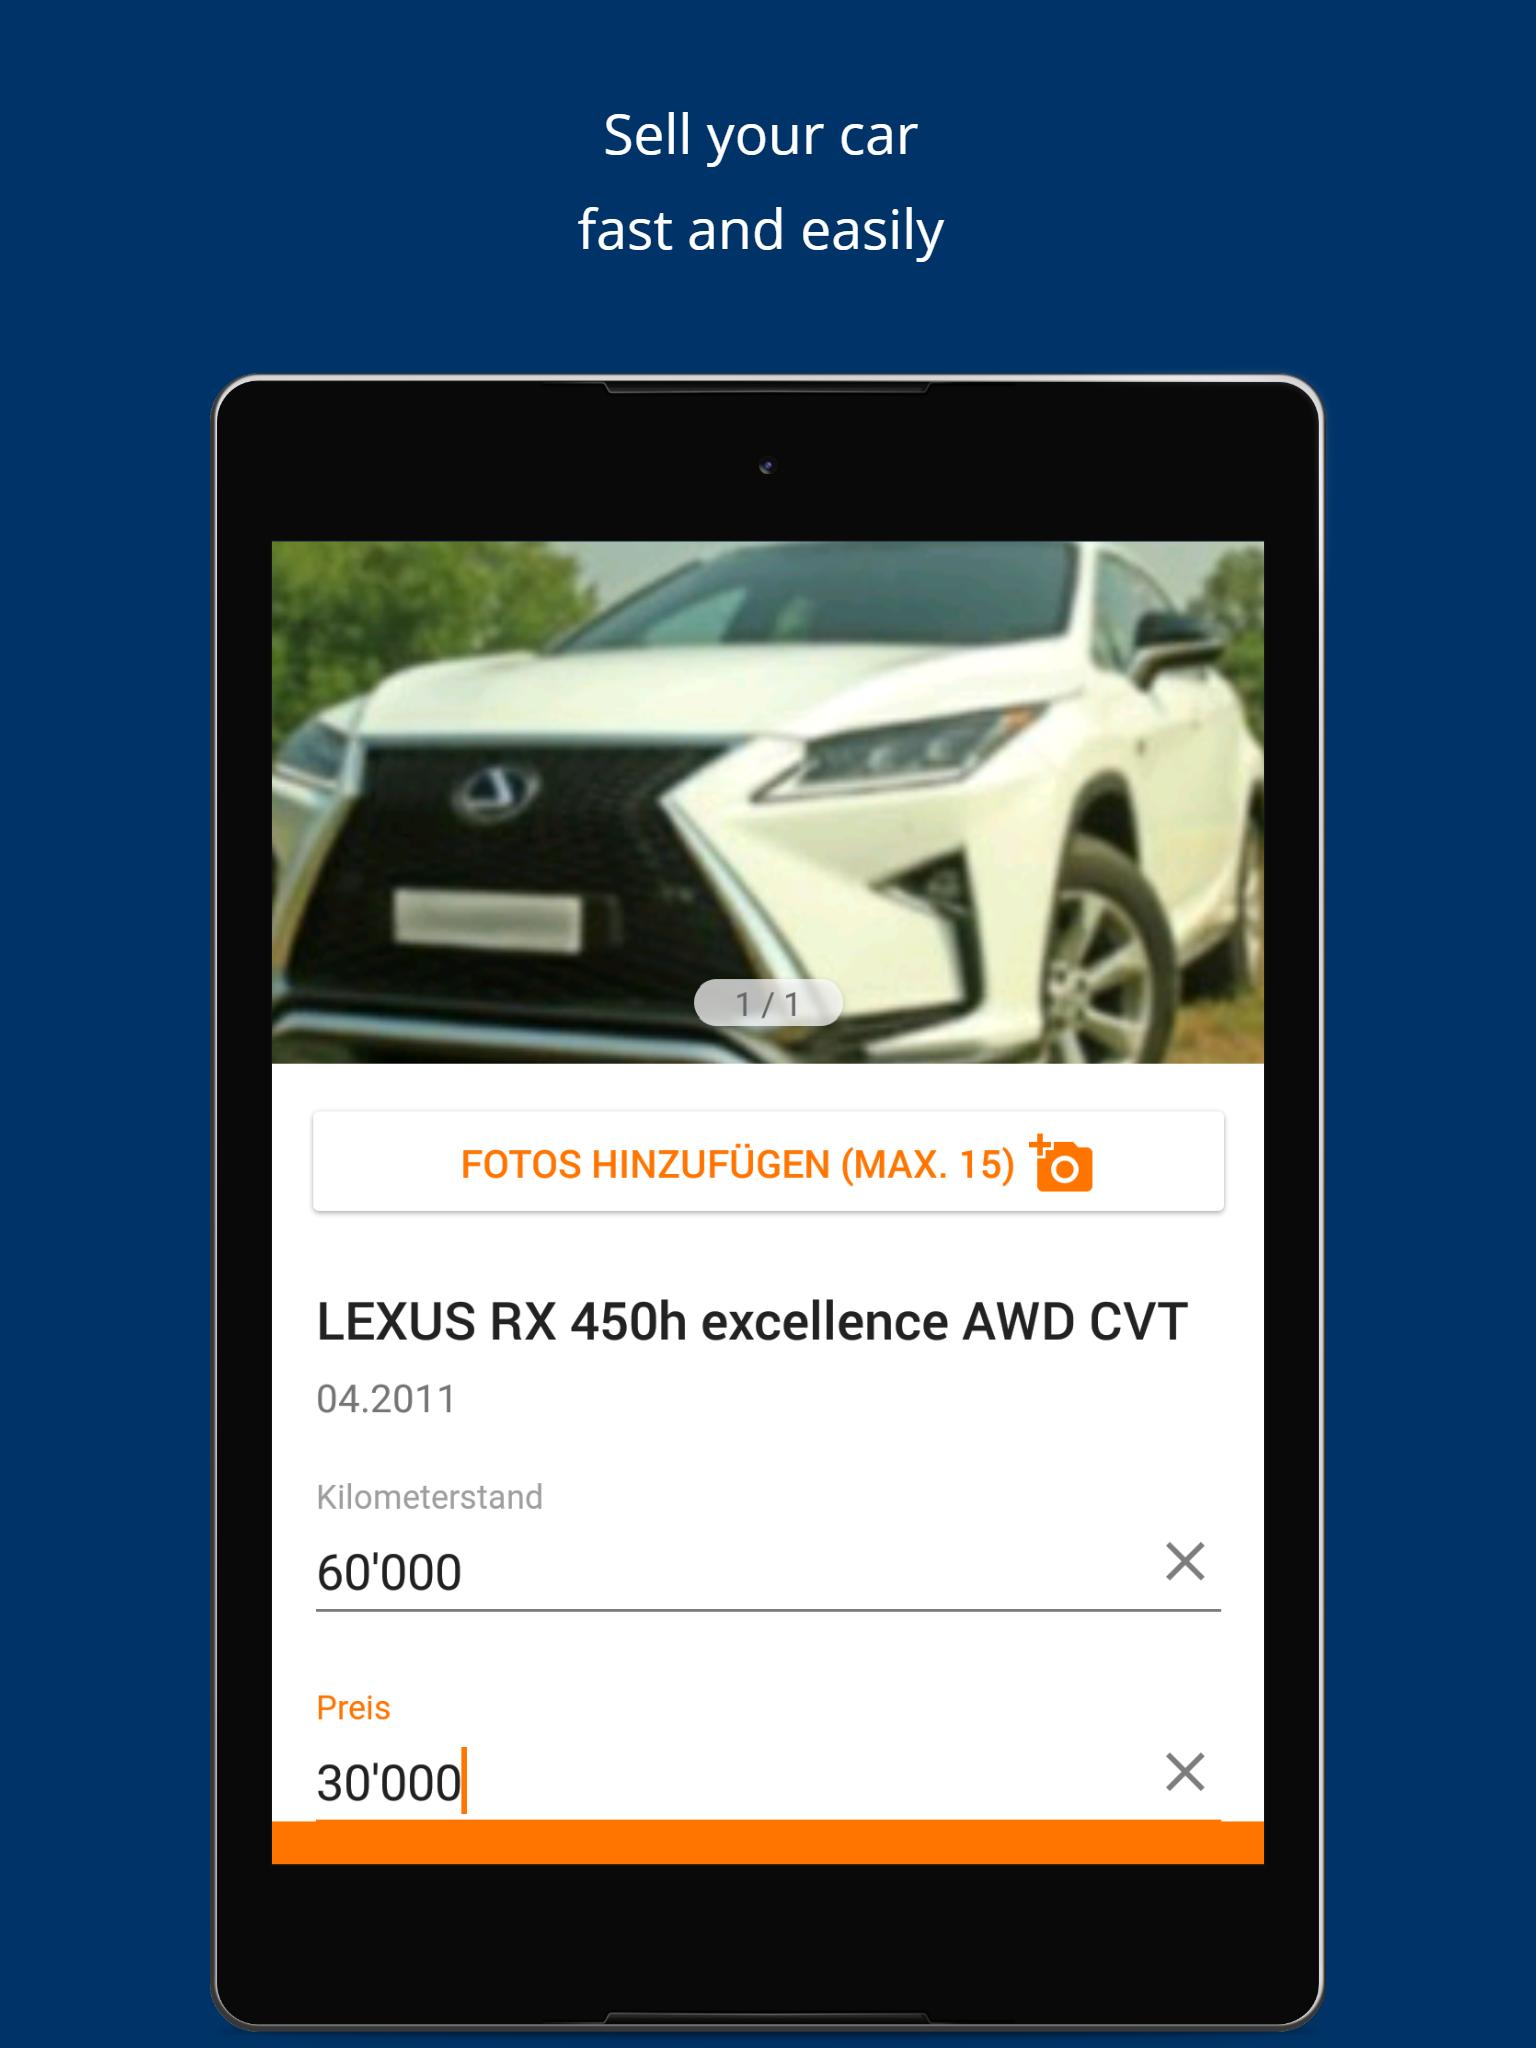 AutoScout24 Switzerland – Find your new car 4.0.0 Screenshot 14